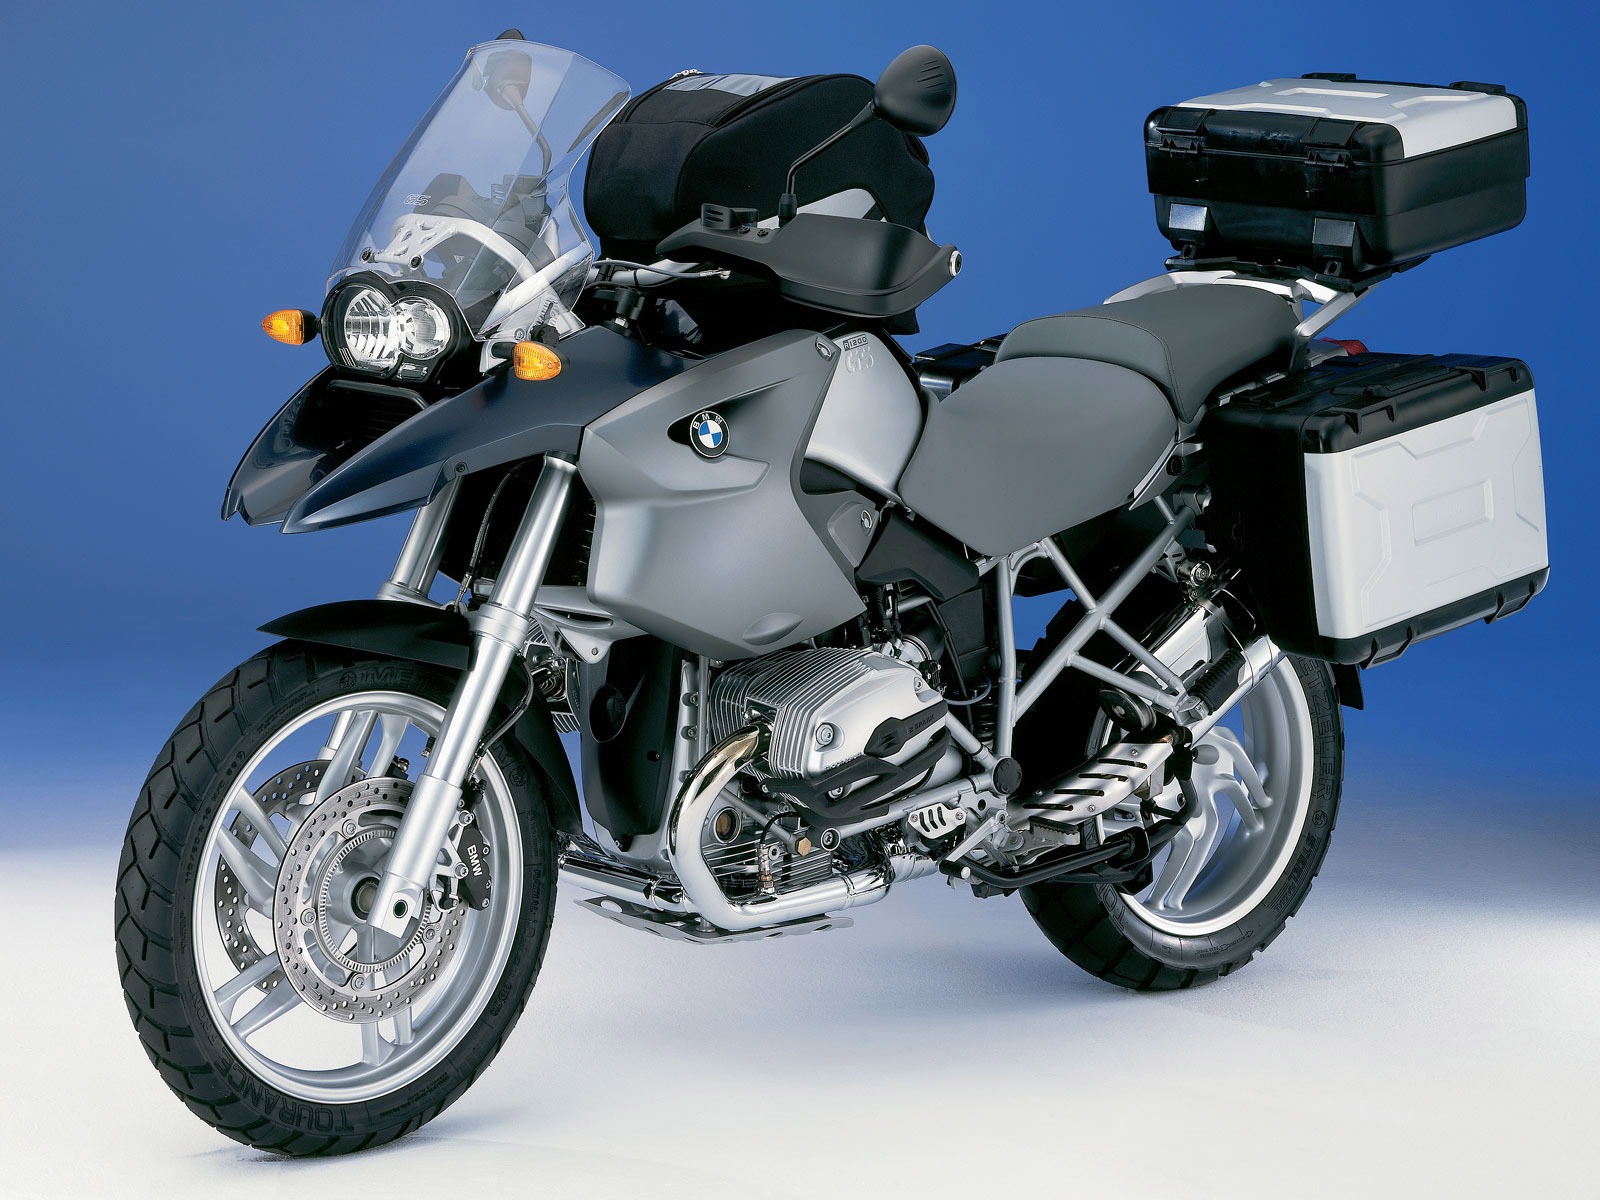 BMW motorcycle wallpapers (3) #18 - 1600x1200